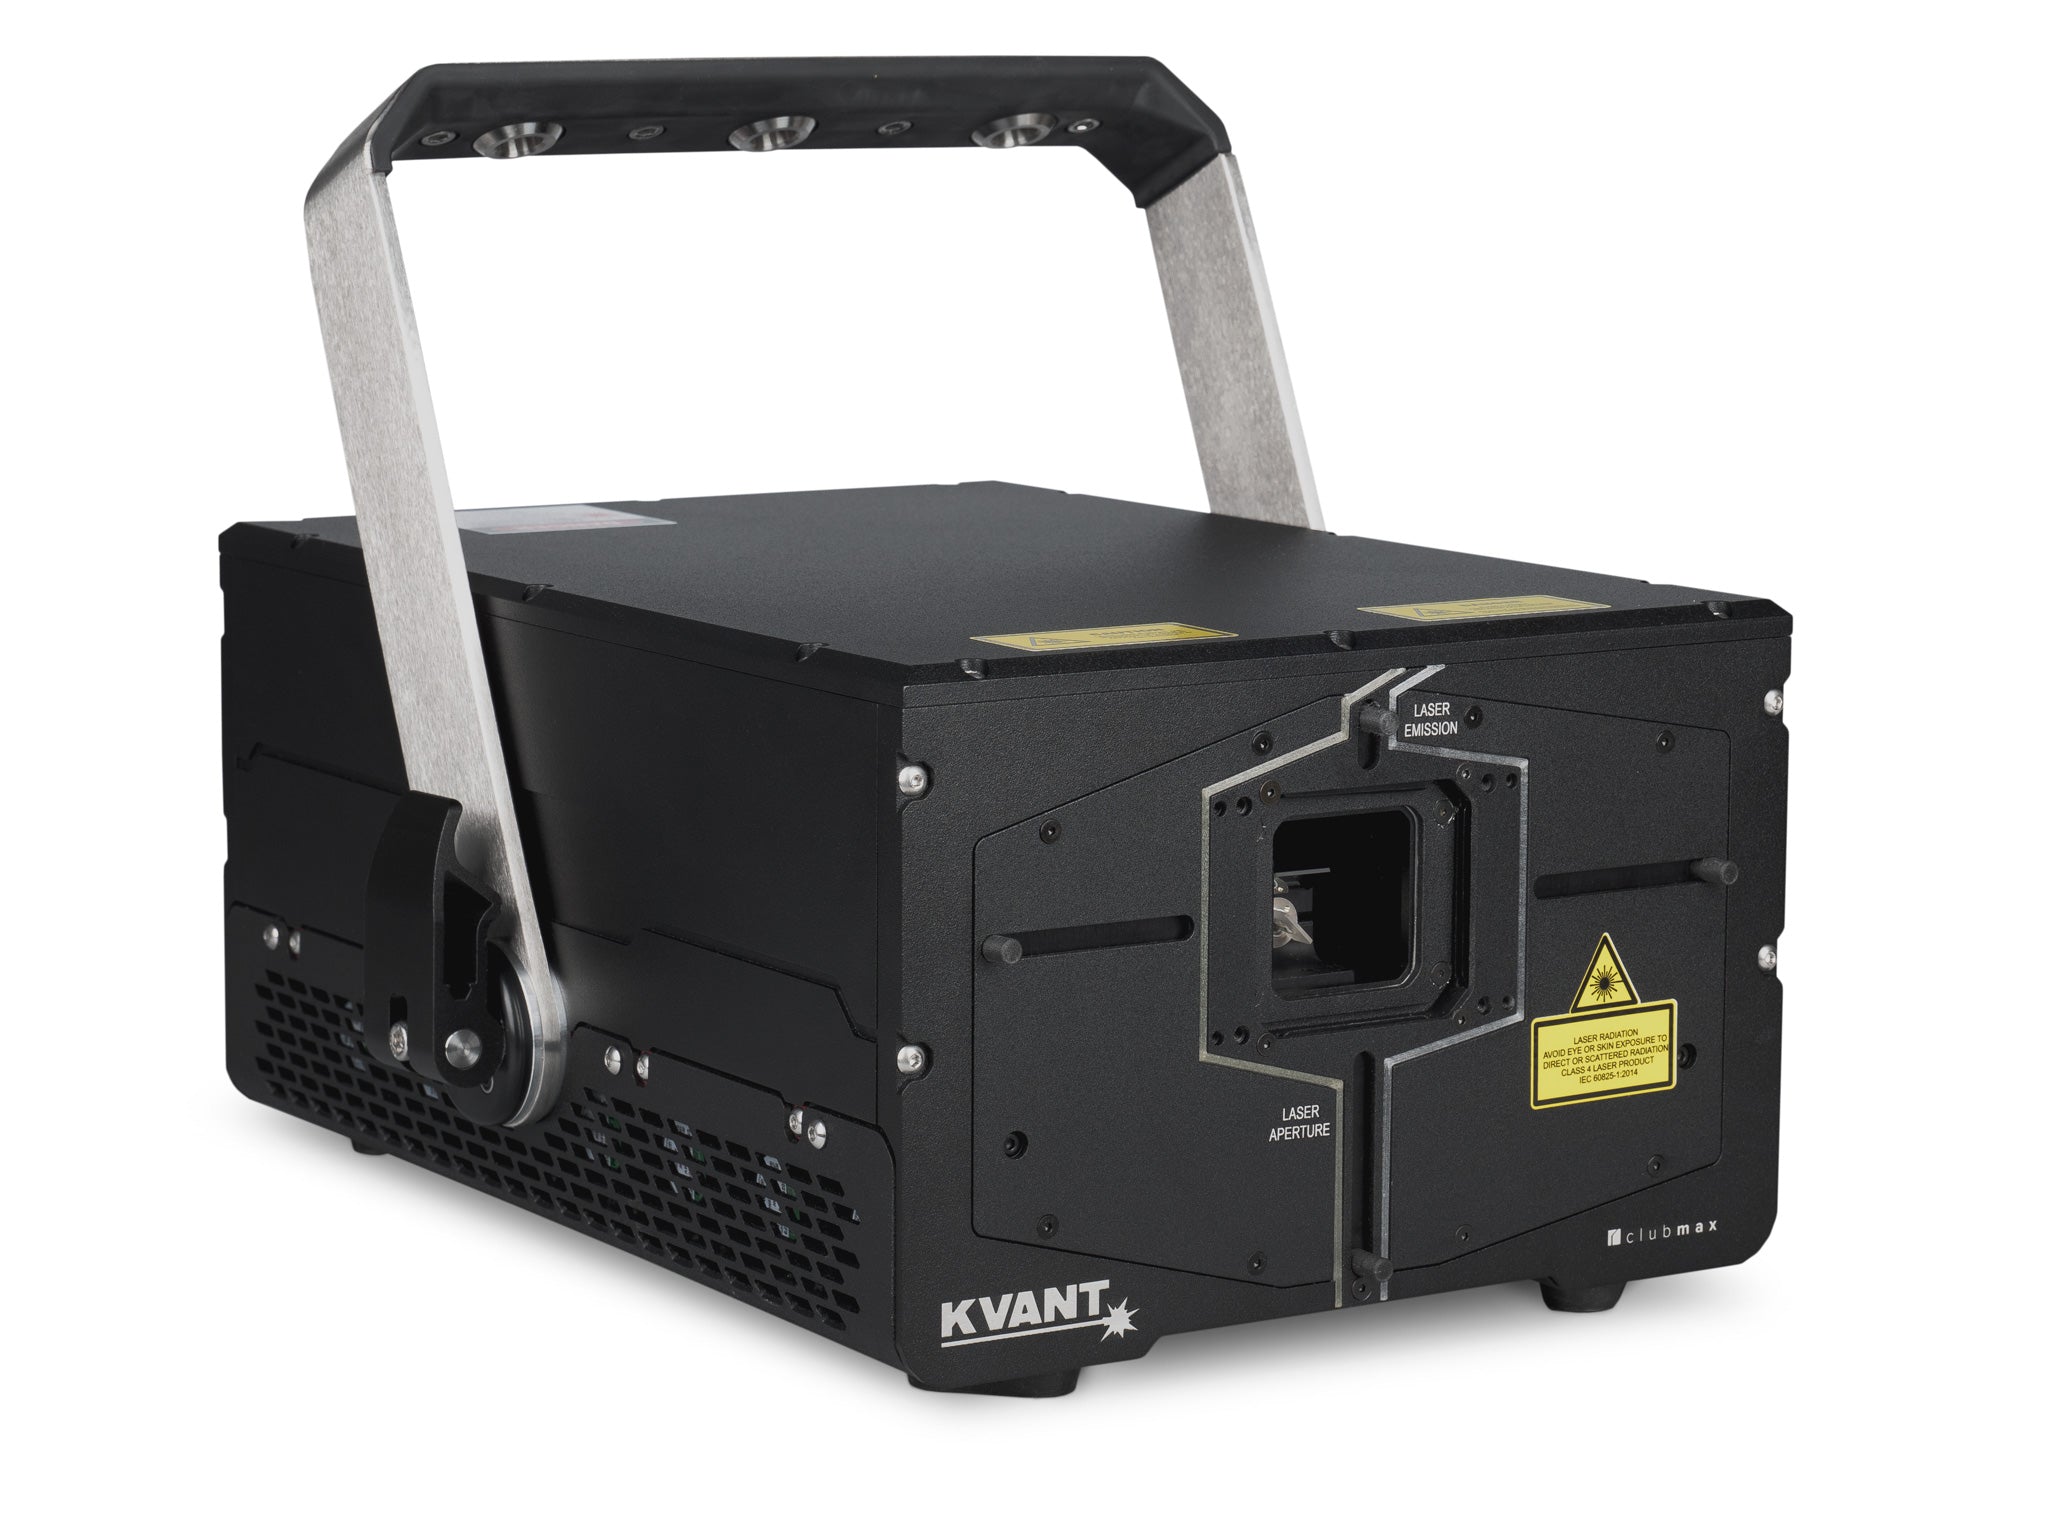 KVANT Clubmax 18 FB4 IP65 waterproof professional laser projector for outdoor shows_1